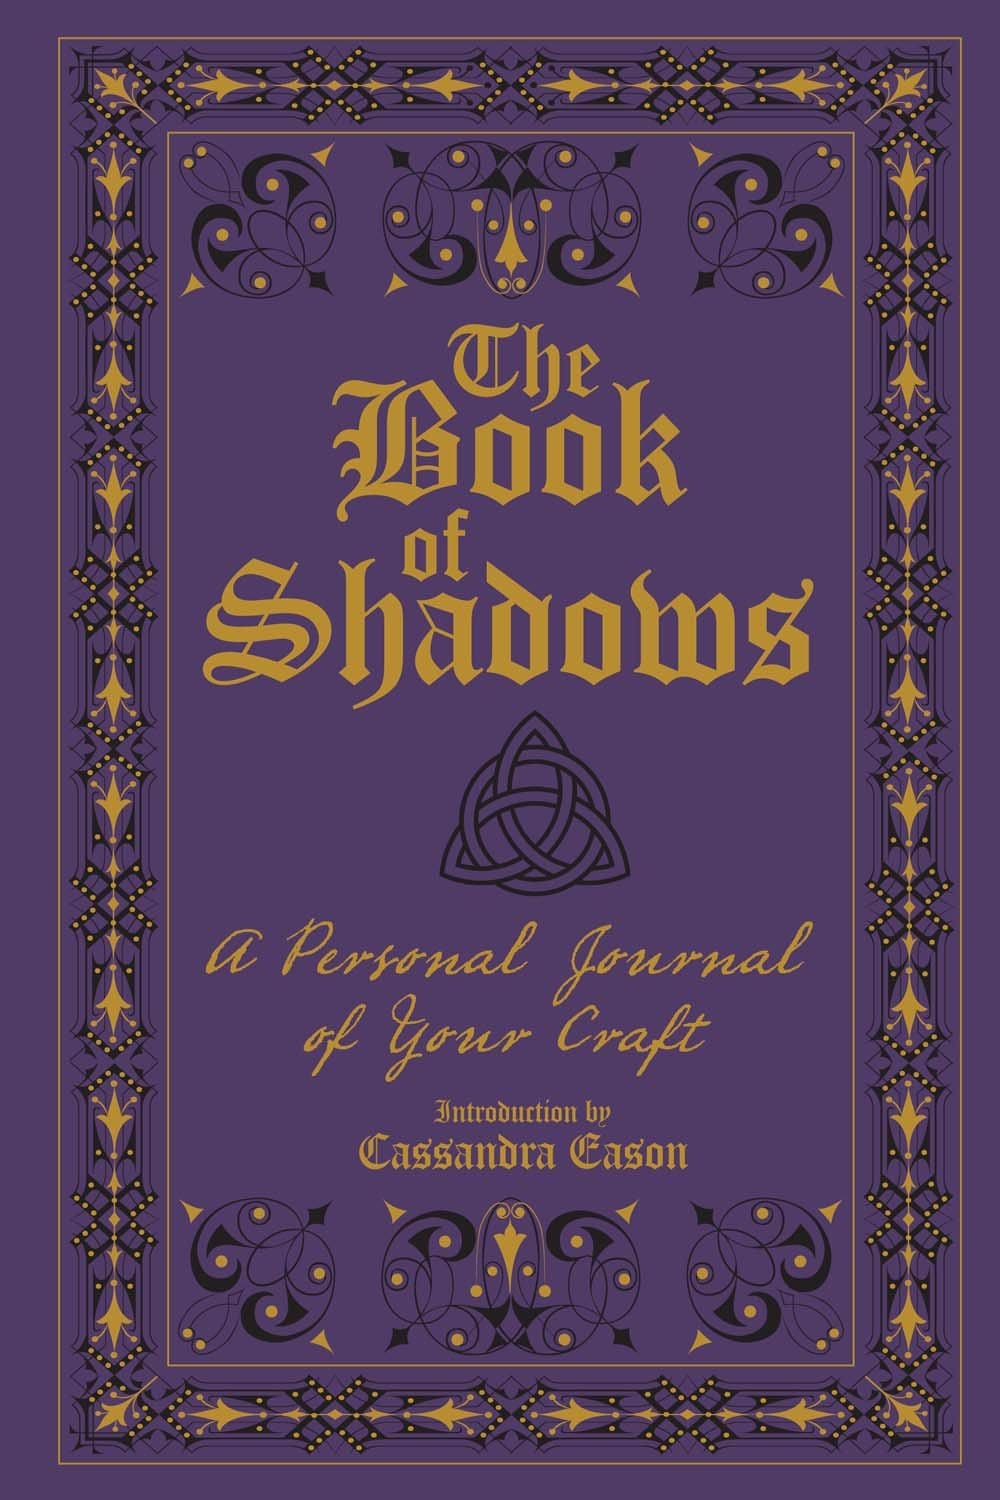 Book of Shadows - Personal Journal of Your Craft - Third Eye